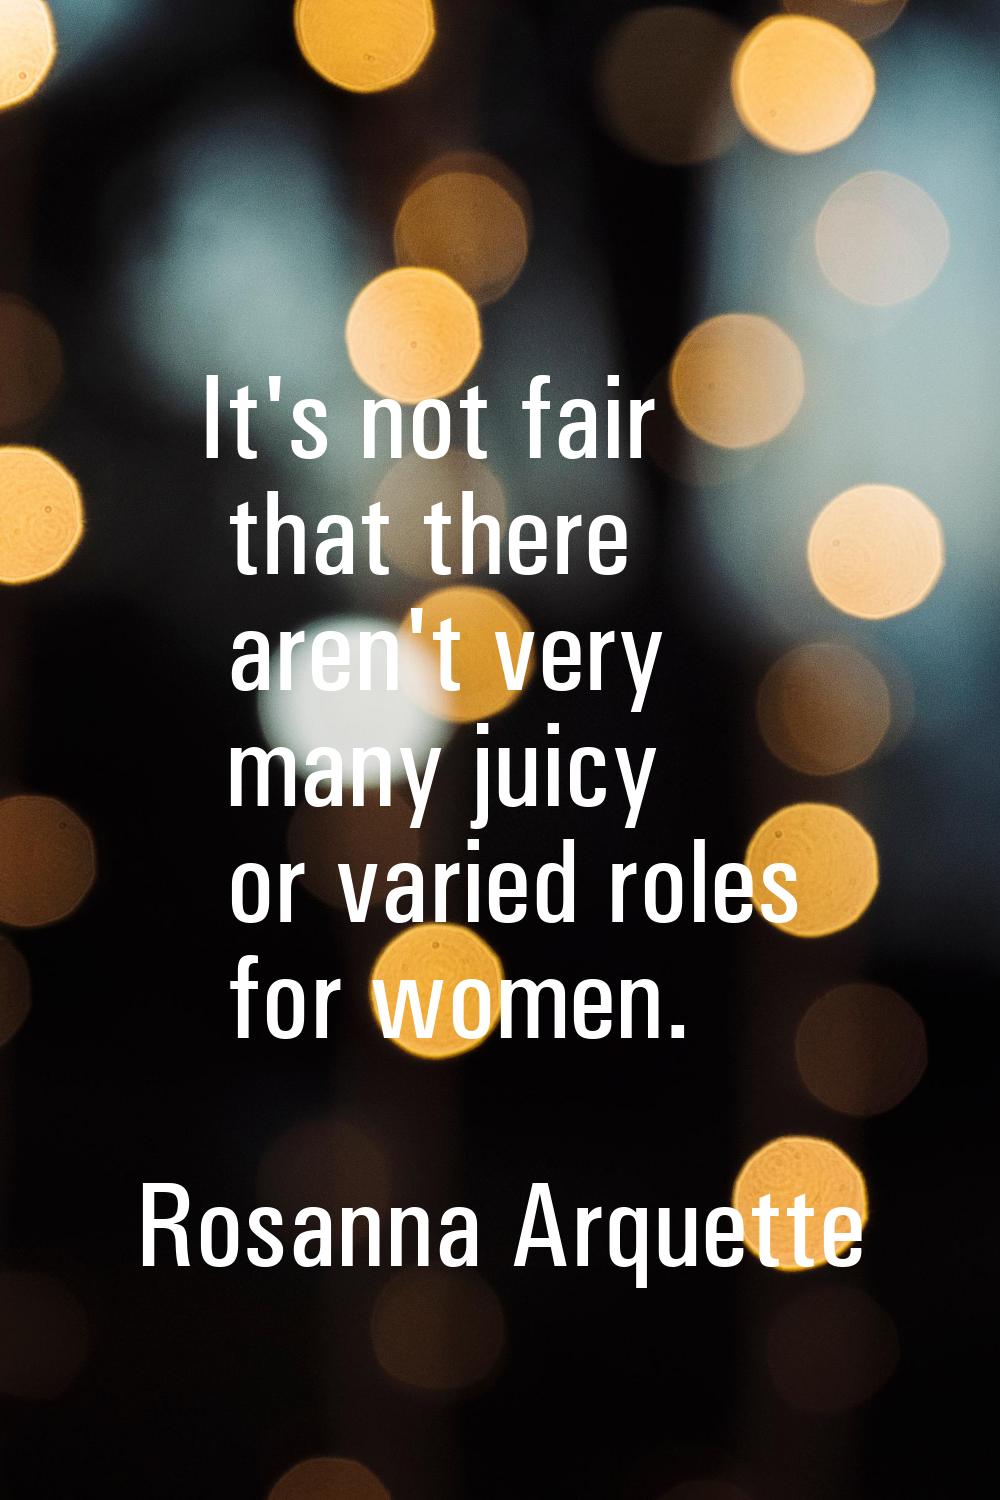 It's not fair that there aren't very many juicy or varied roles for women.